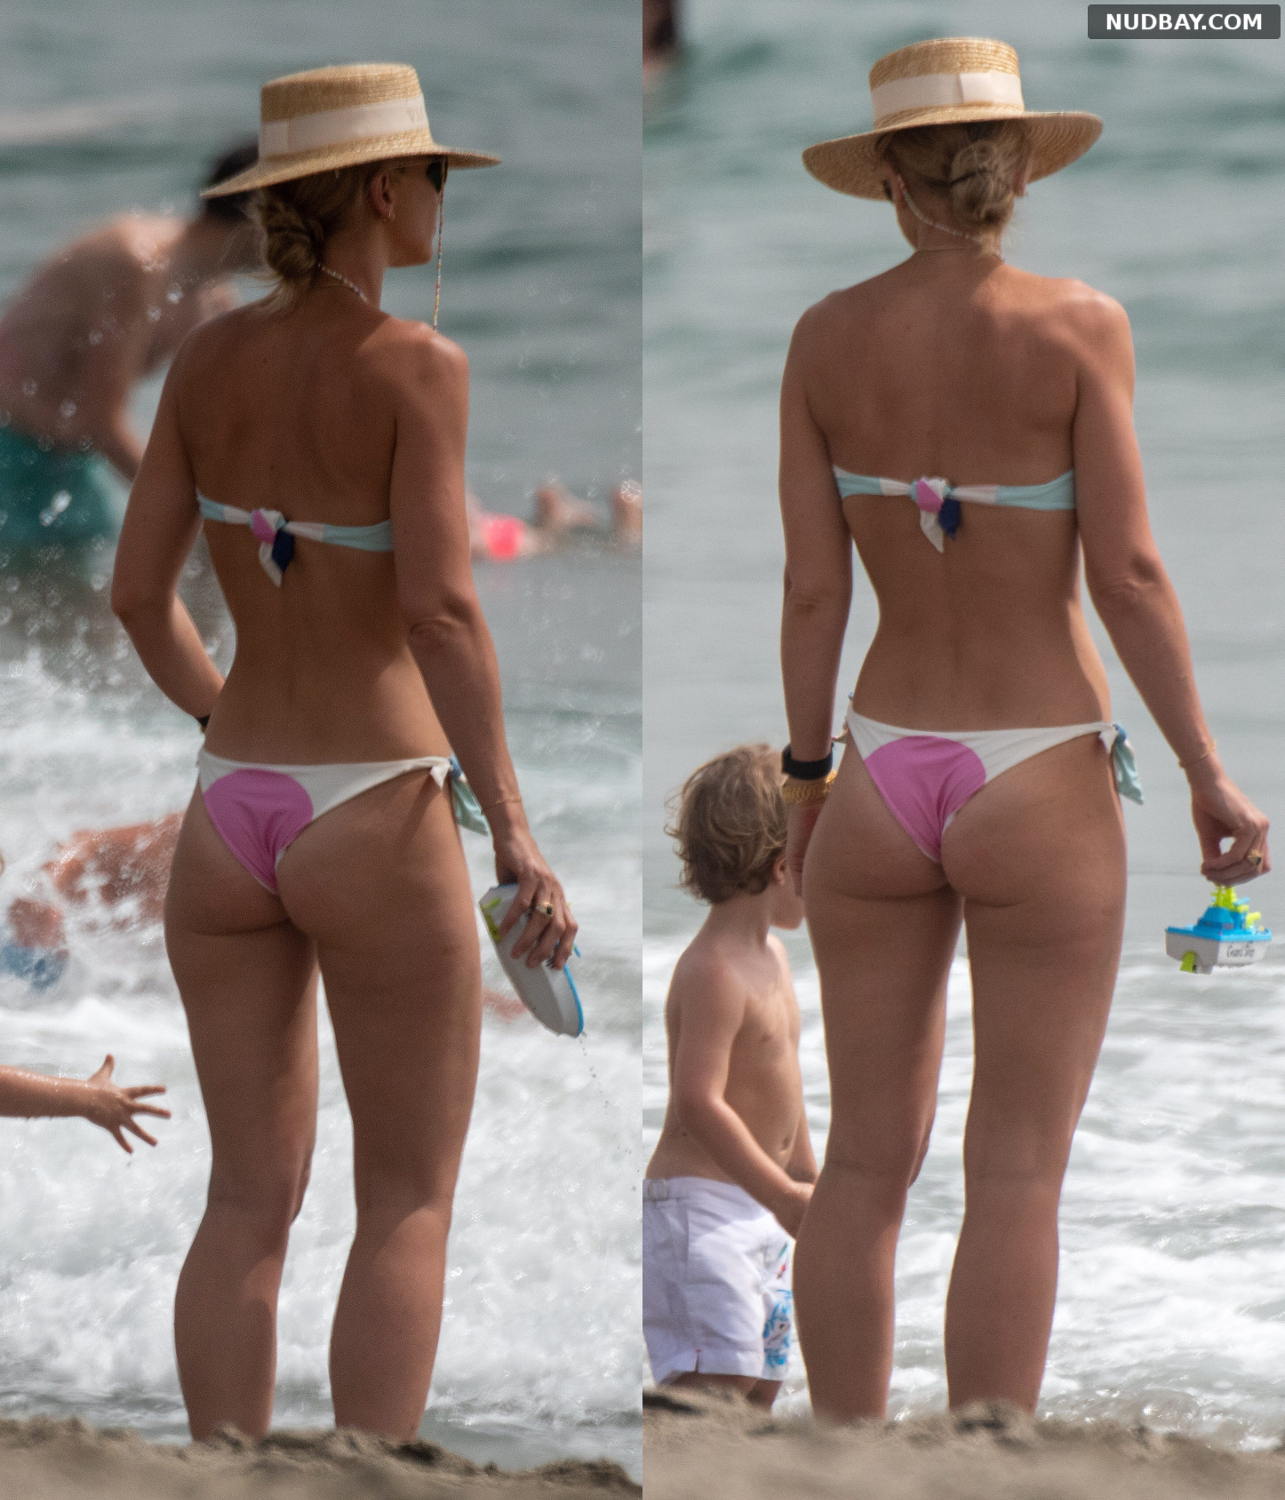 Vogue Williams Ass in a bikini on holiday in Costa del Sol August 11 2021